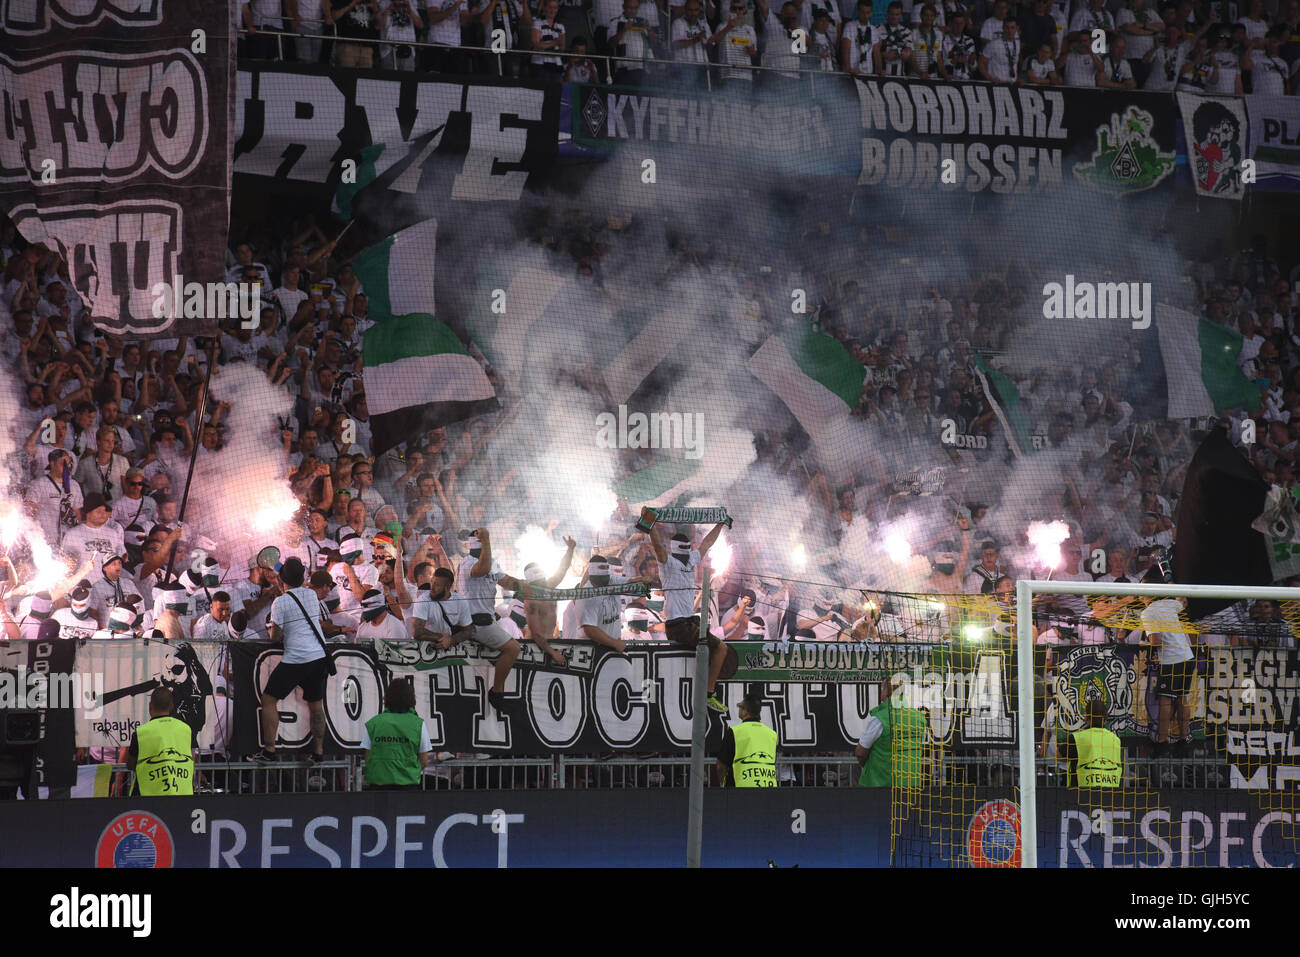 Moenchengladbach's fans displays pyrotechnics at UEFA Champions League  playoff first leg match between Switzerland's BSC Young Boys and Germany's  Borussia Moenchengladbach at the Stade de Suisse stadium in Bern,  Switzerland, on Tuesday,